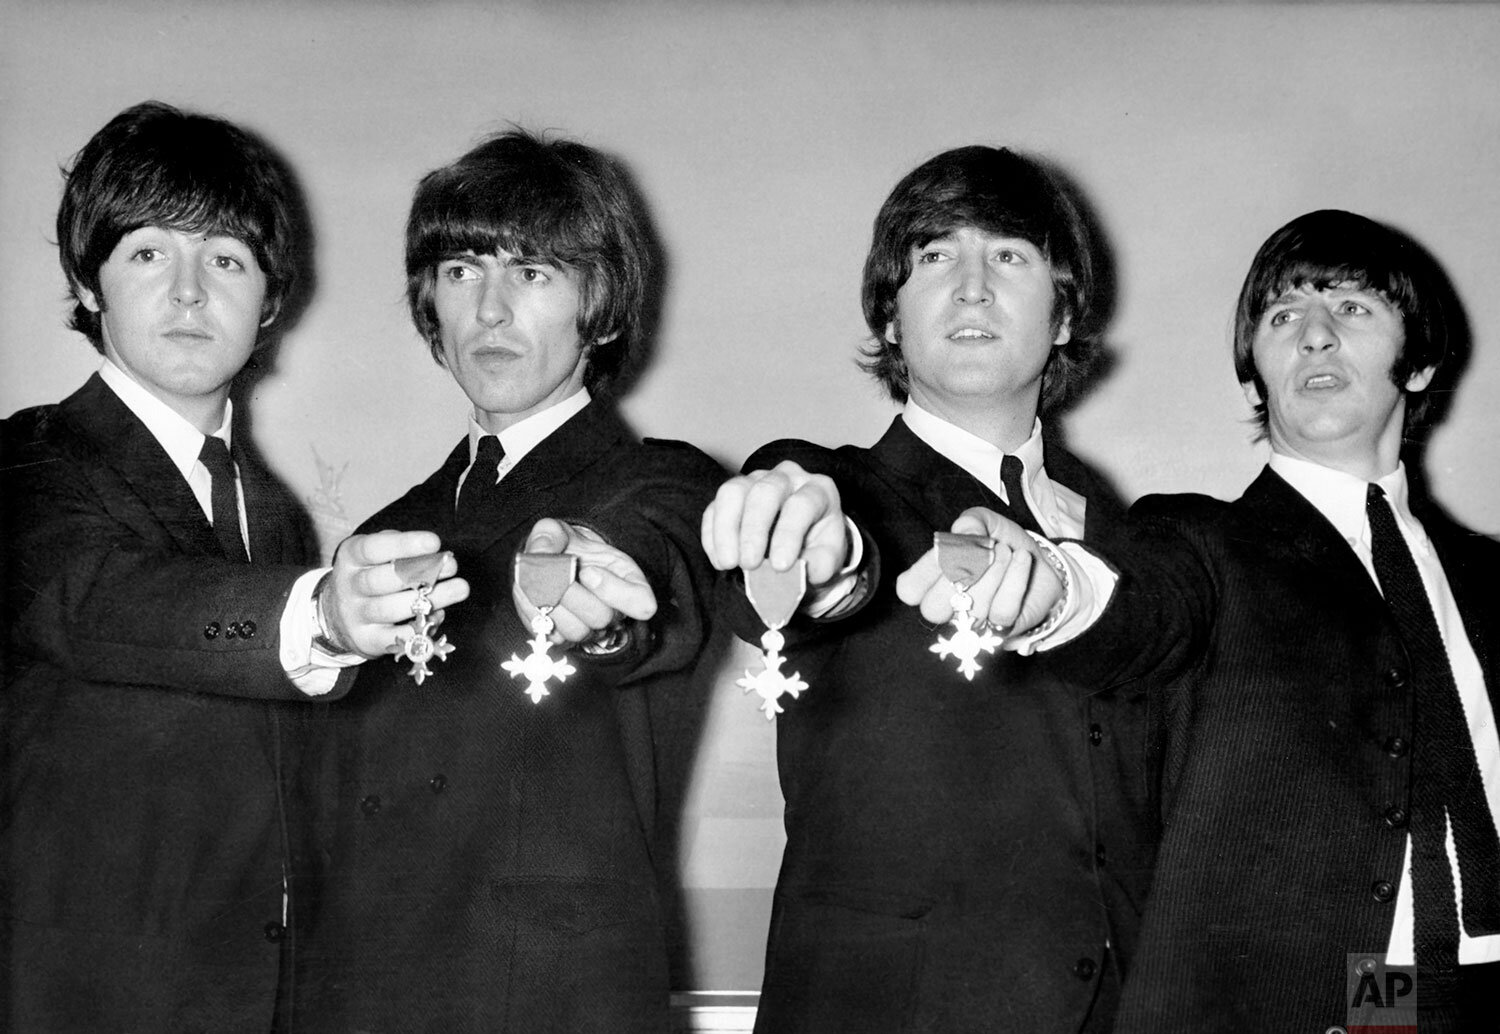  The Beatles pose with their medals during a press conference in London after being made members of the Order of the British Empire, Oct. 26, 1965.  The medals were presented to them by the Queen at Buckingham Palace. (AP Photo) 